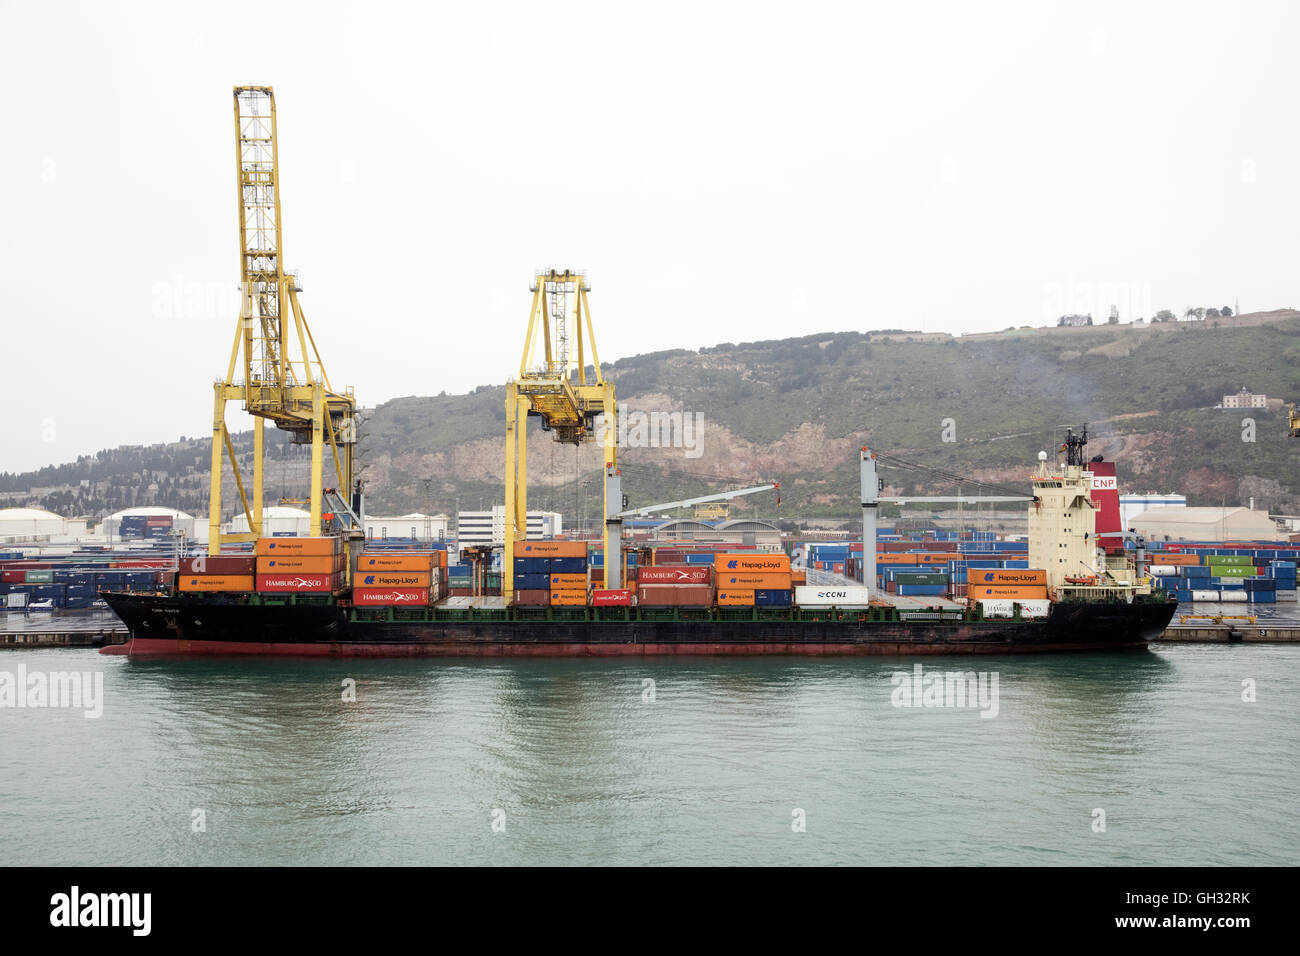 Container ship CNP PAITA in a Spanish port Stock Photo